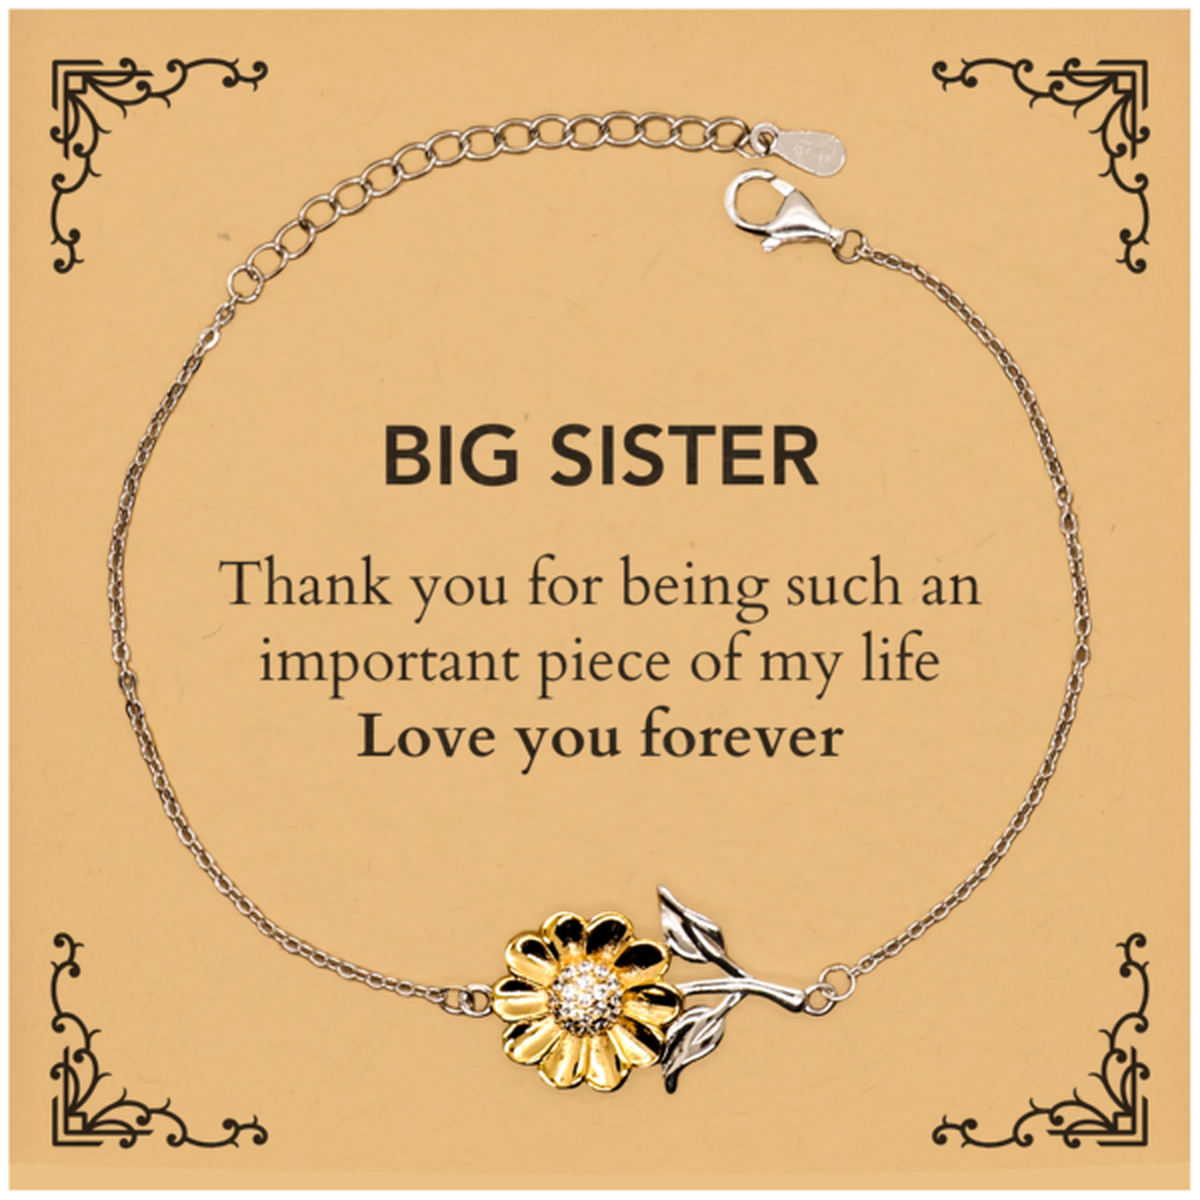 Appropriate Big Sister Sunflower Bracelet Epic Birthday Gifts for Big Sister Thank you for being such an important piece of my life Big Sister Christmas Mothers Fathers Day